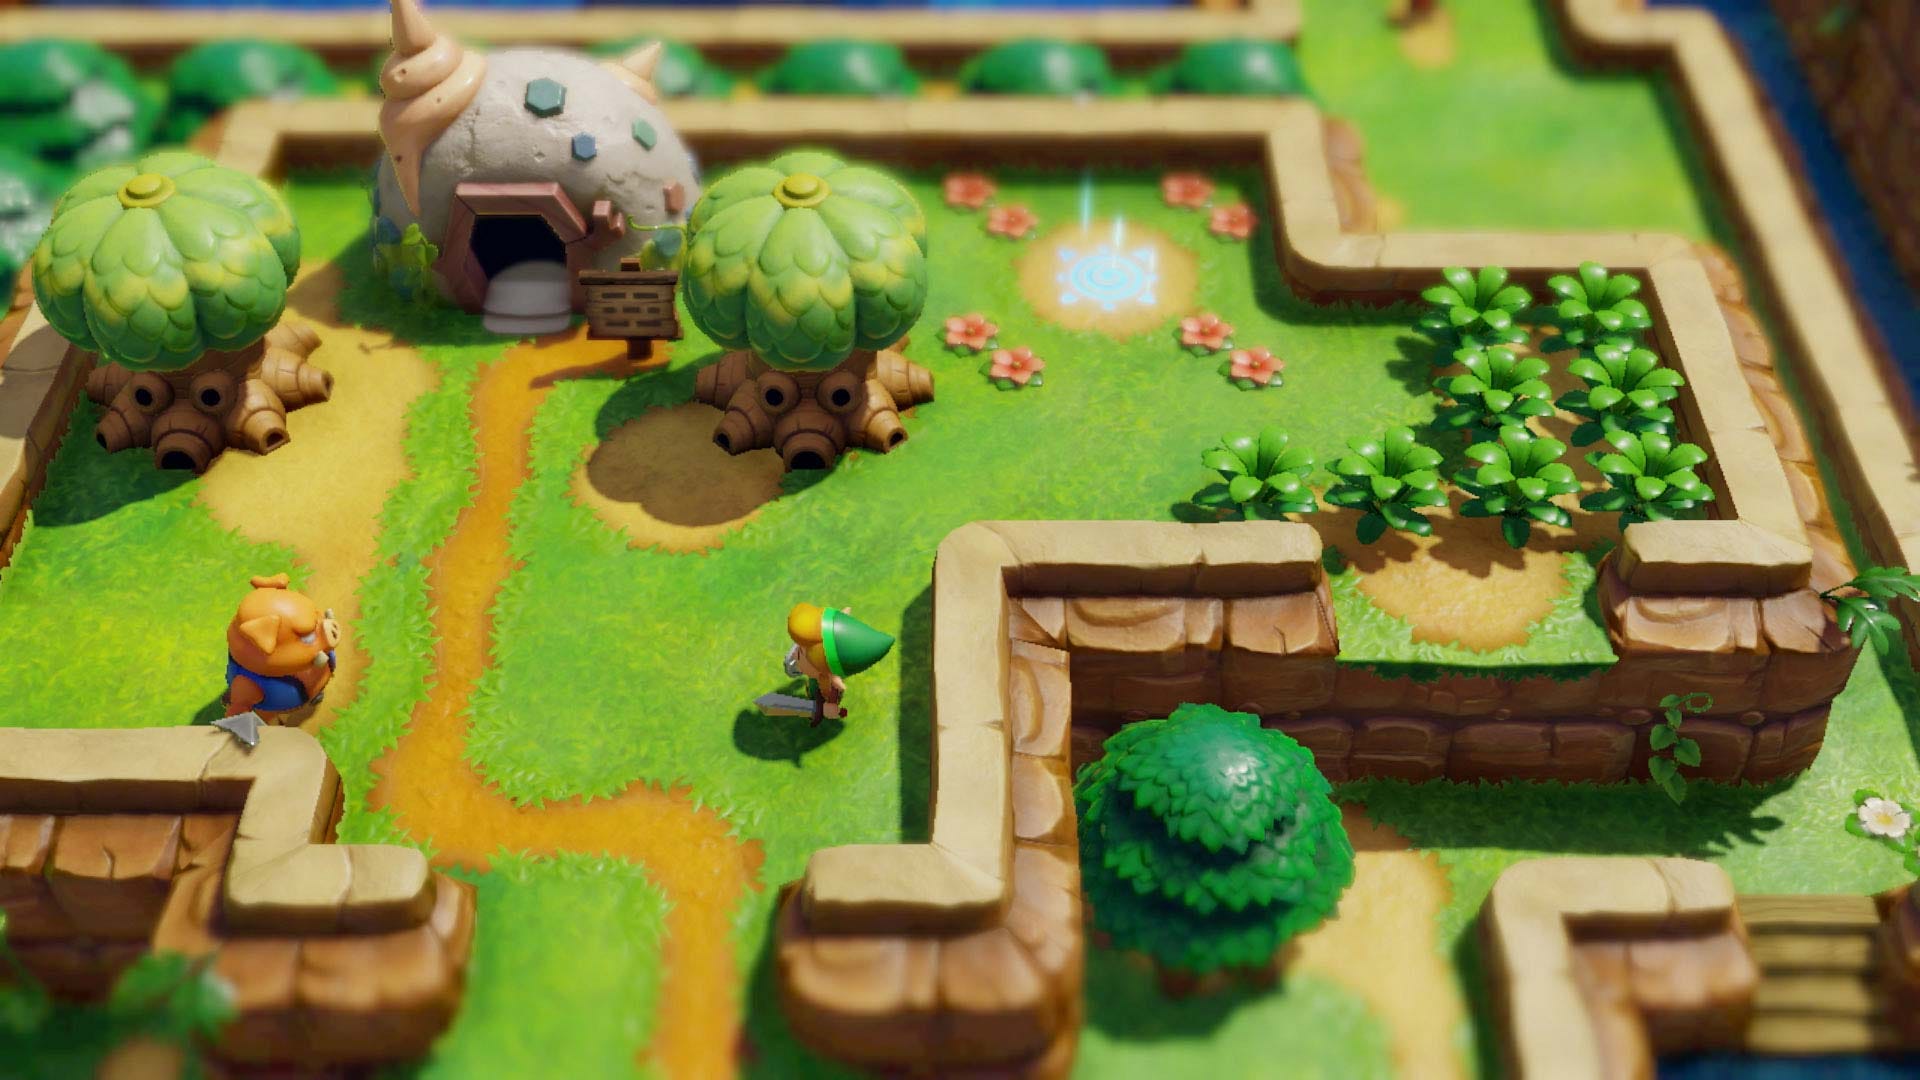 Number Of Players For Link's Awakening On Switch To Be Determined